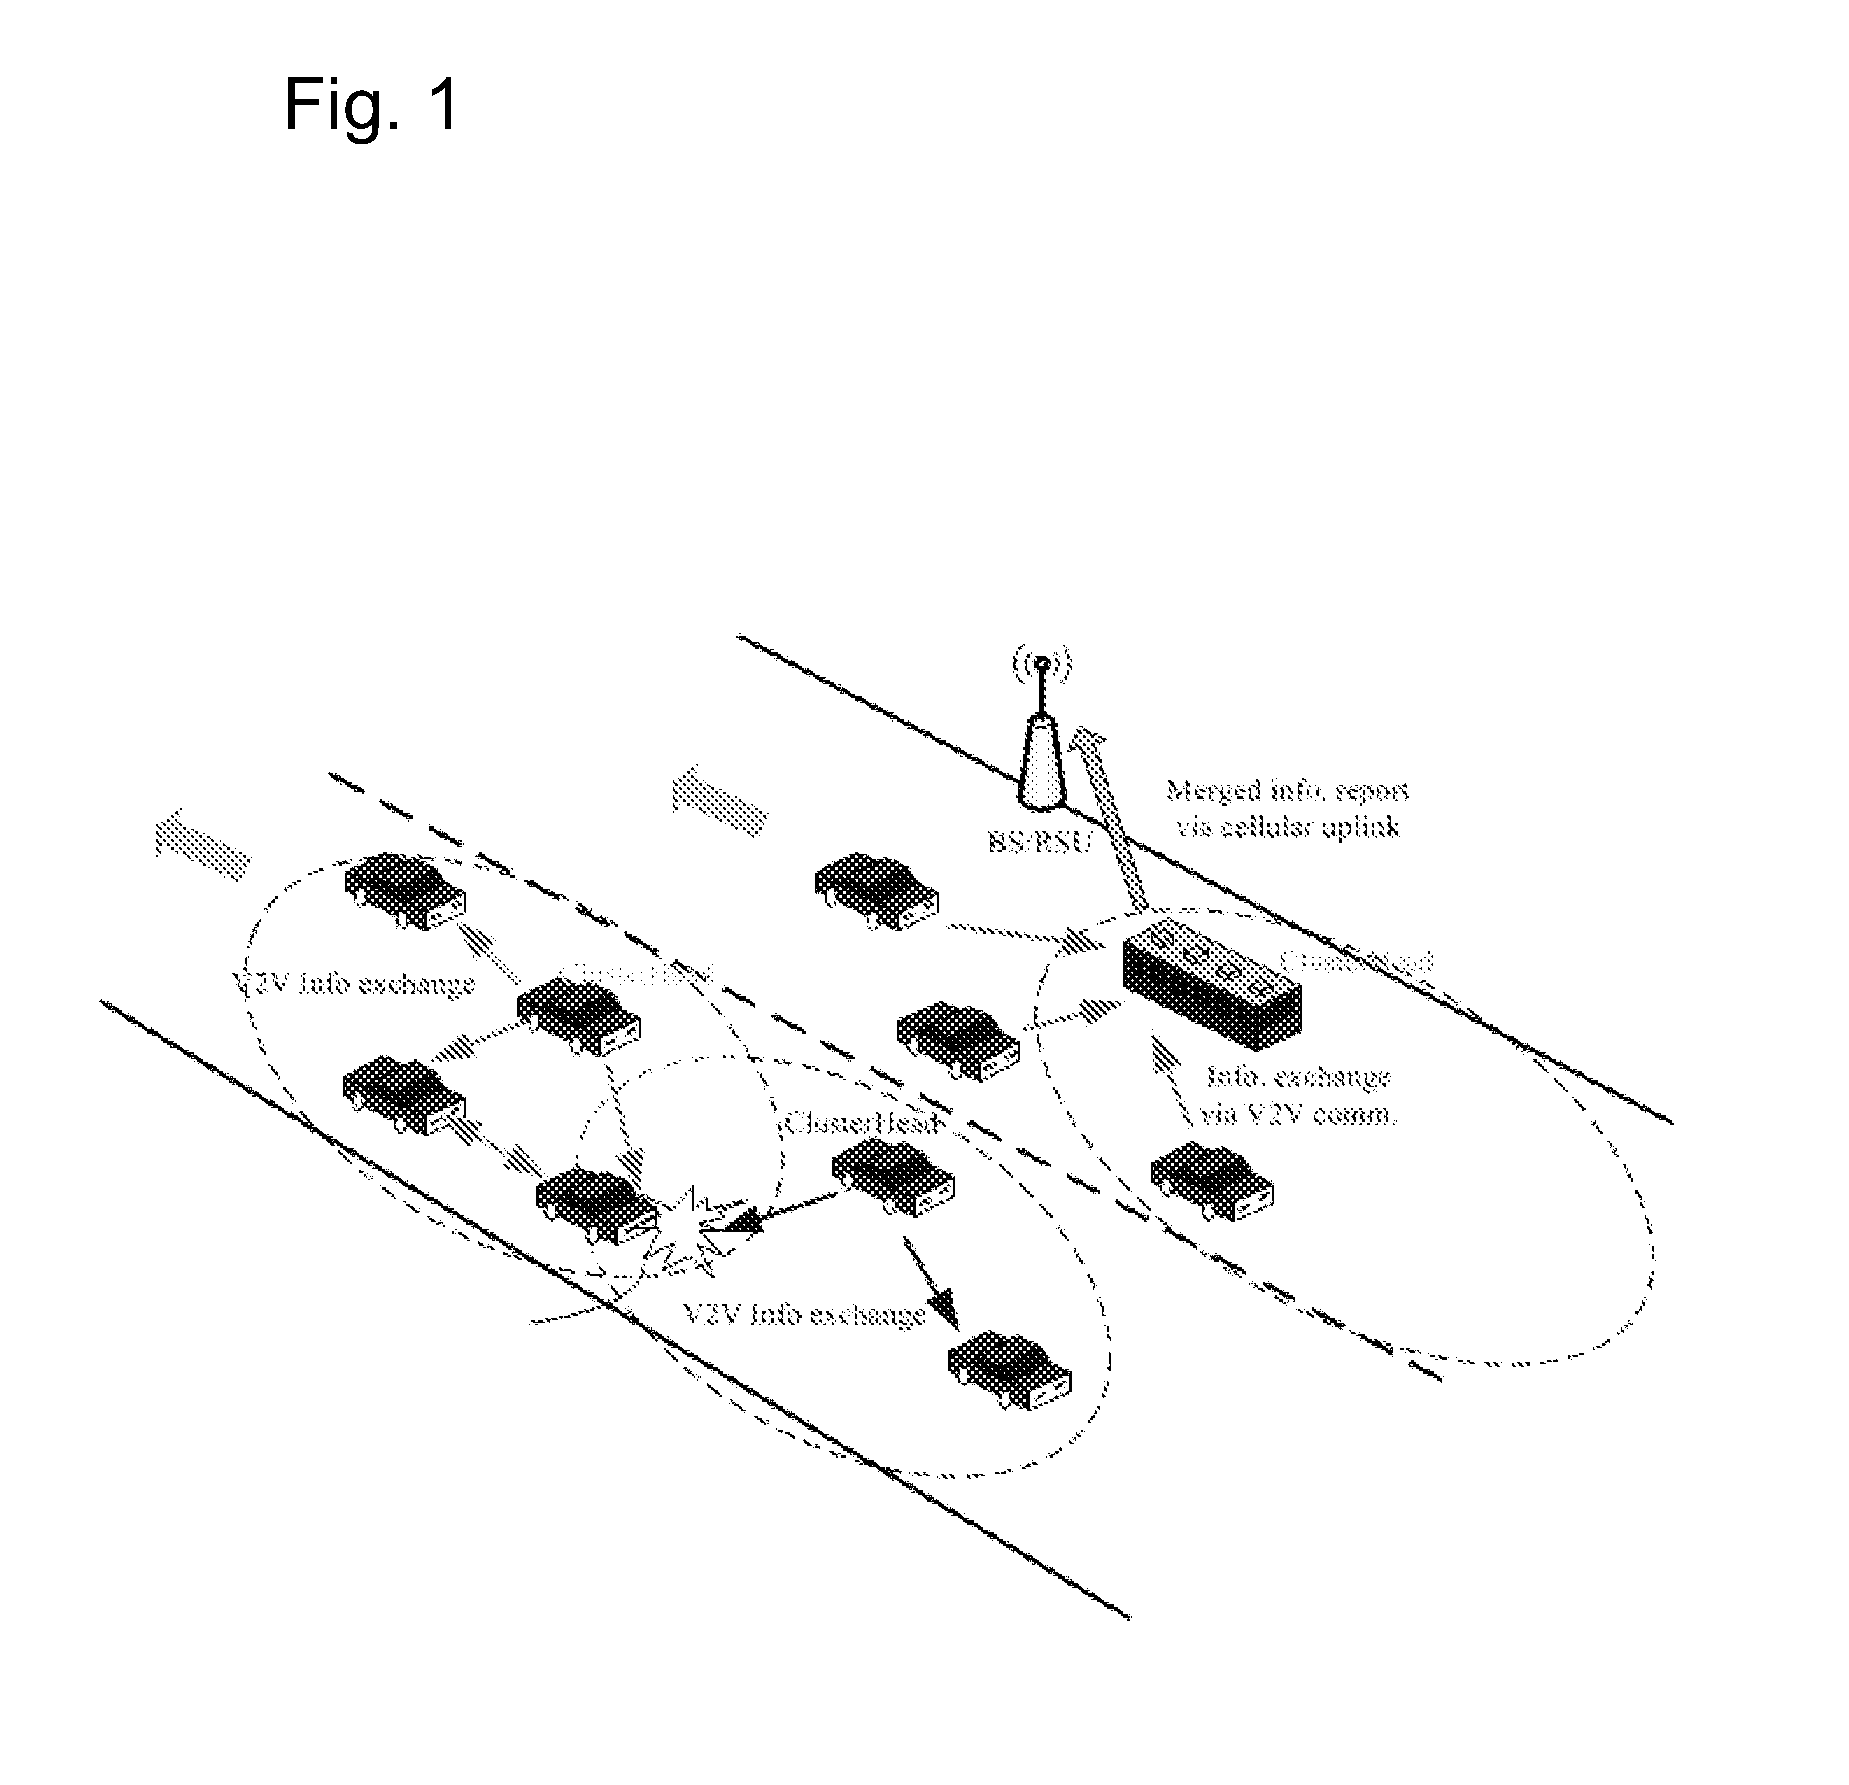 Vehicle gateway access in cellular network for vehicle communications